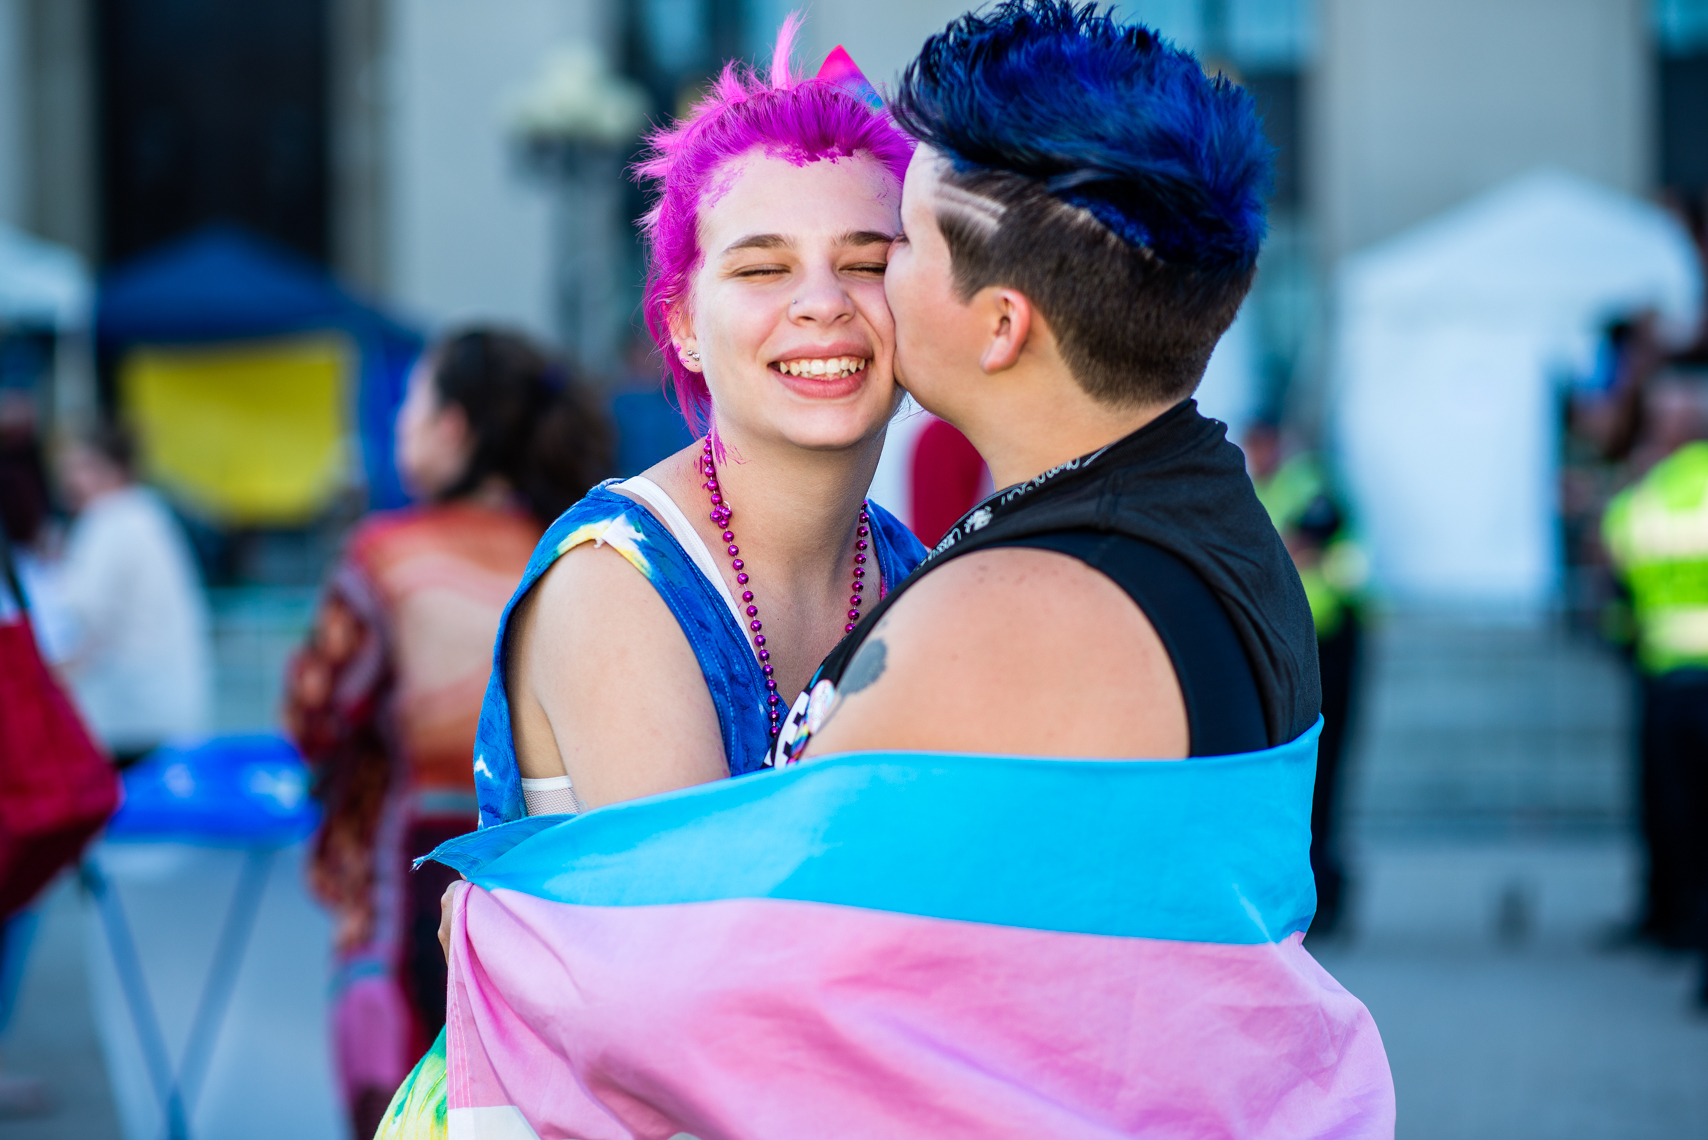 Nashville Pride Festival 2017 | Photographer + Director, Kristina Krug | authentic, authenticity, bisexual, celebrate, celebration, civil, civil liberties, courage, dancing, documentary, drag, emotions, equality, esteem, fearless, festival, festive, free, freedom, friends, fun, gay, happy, journalism, joy, joyful, Kristina Krug, krug photo, lesbian, LGBT, LGBTQ, liberty, love, love wins, loved, love is love, loveliness, lovers, love wins, men, National Pride Day, parade, people, photographer, photojournalism, photojournalist, Portrait, Predators, pride, Pride Parade, proud, queen, queer, relationship, reportage, respect, rights, safety, self, sexuality, summer, sun, sunny, Transgender, women, could kissing at a music festival in Public Square Park in Nashville